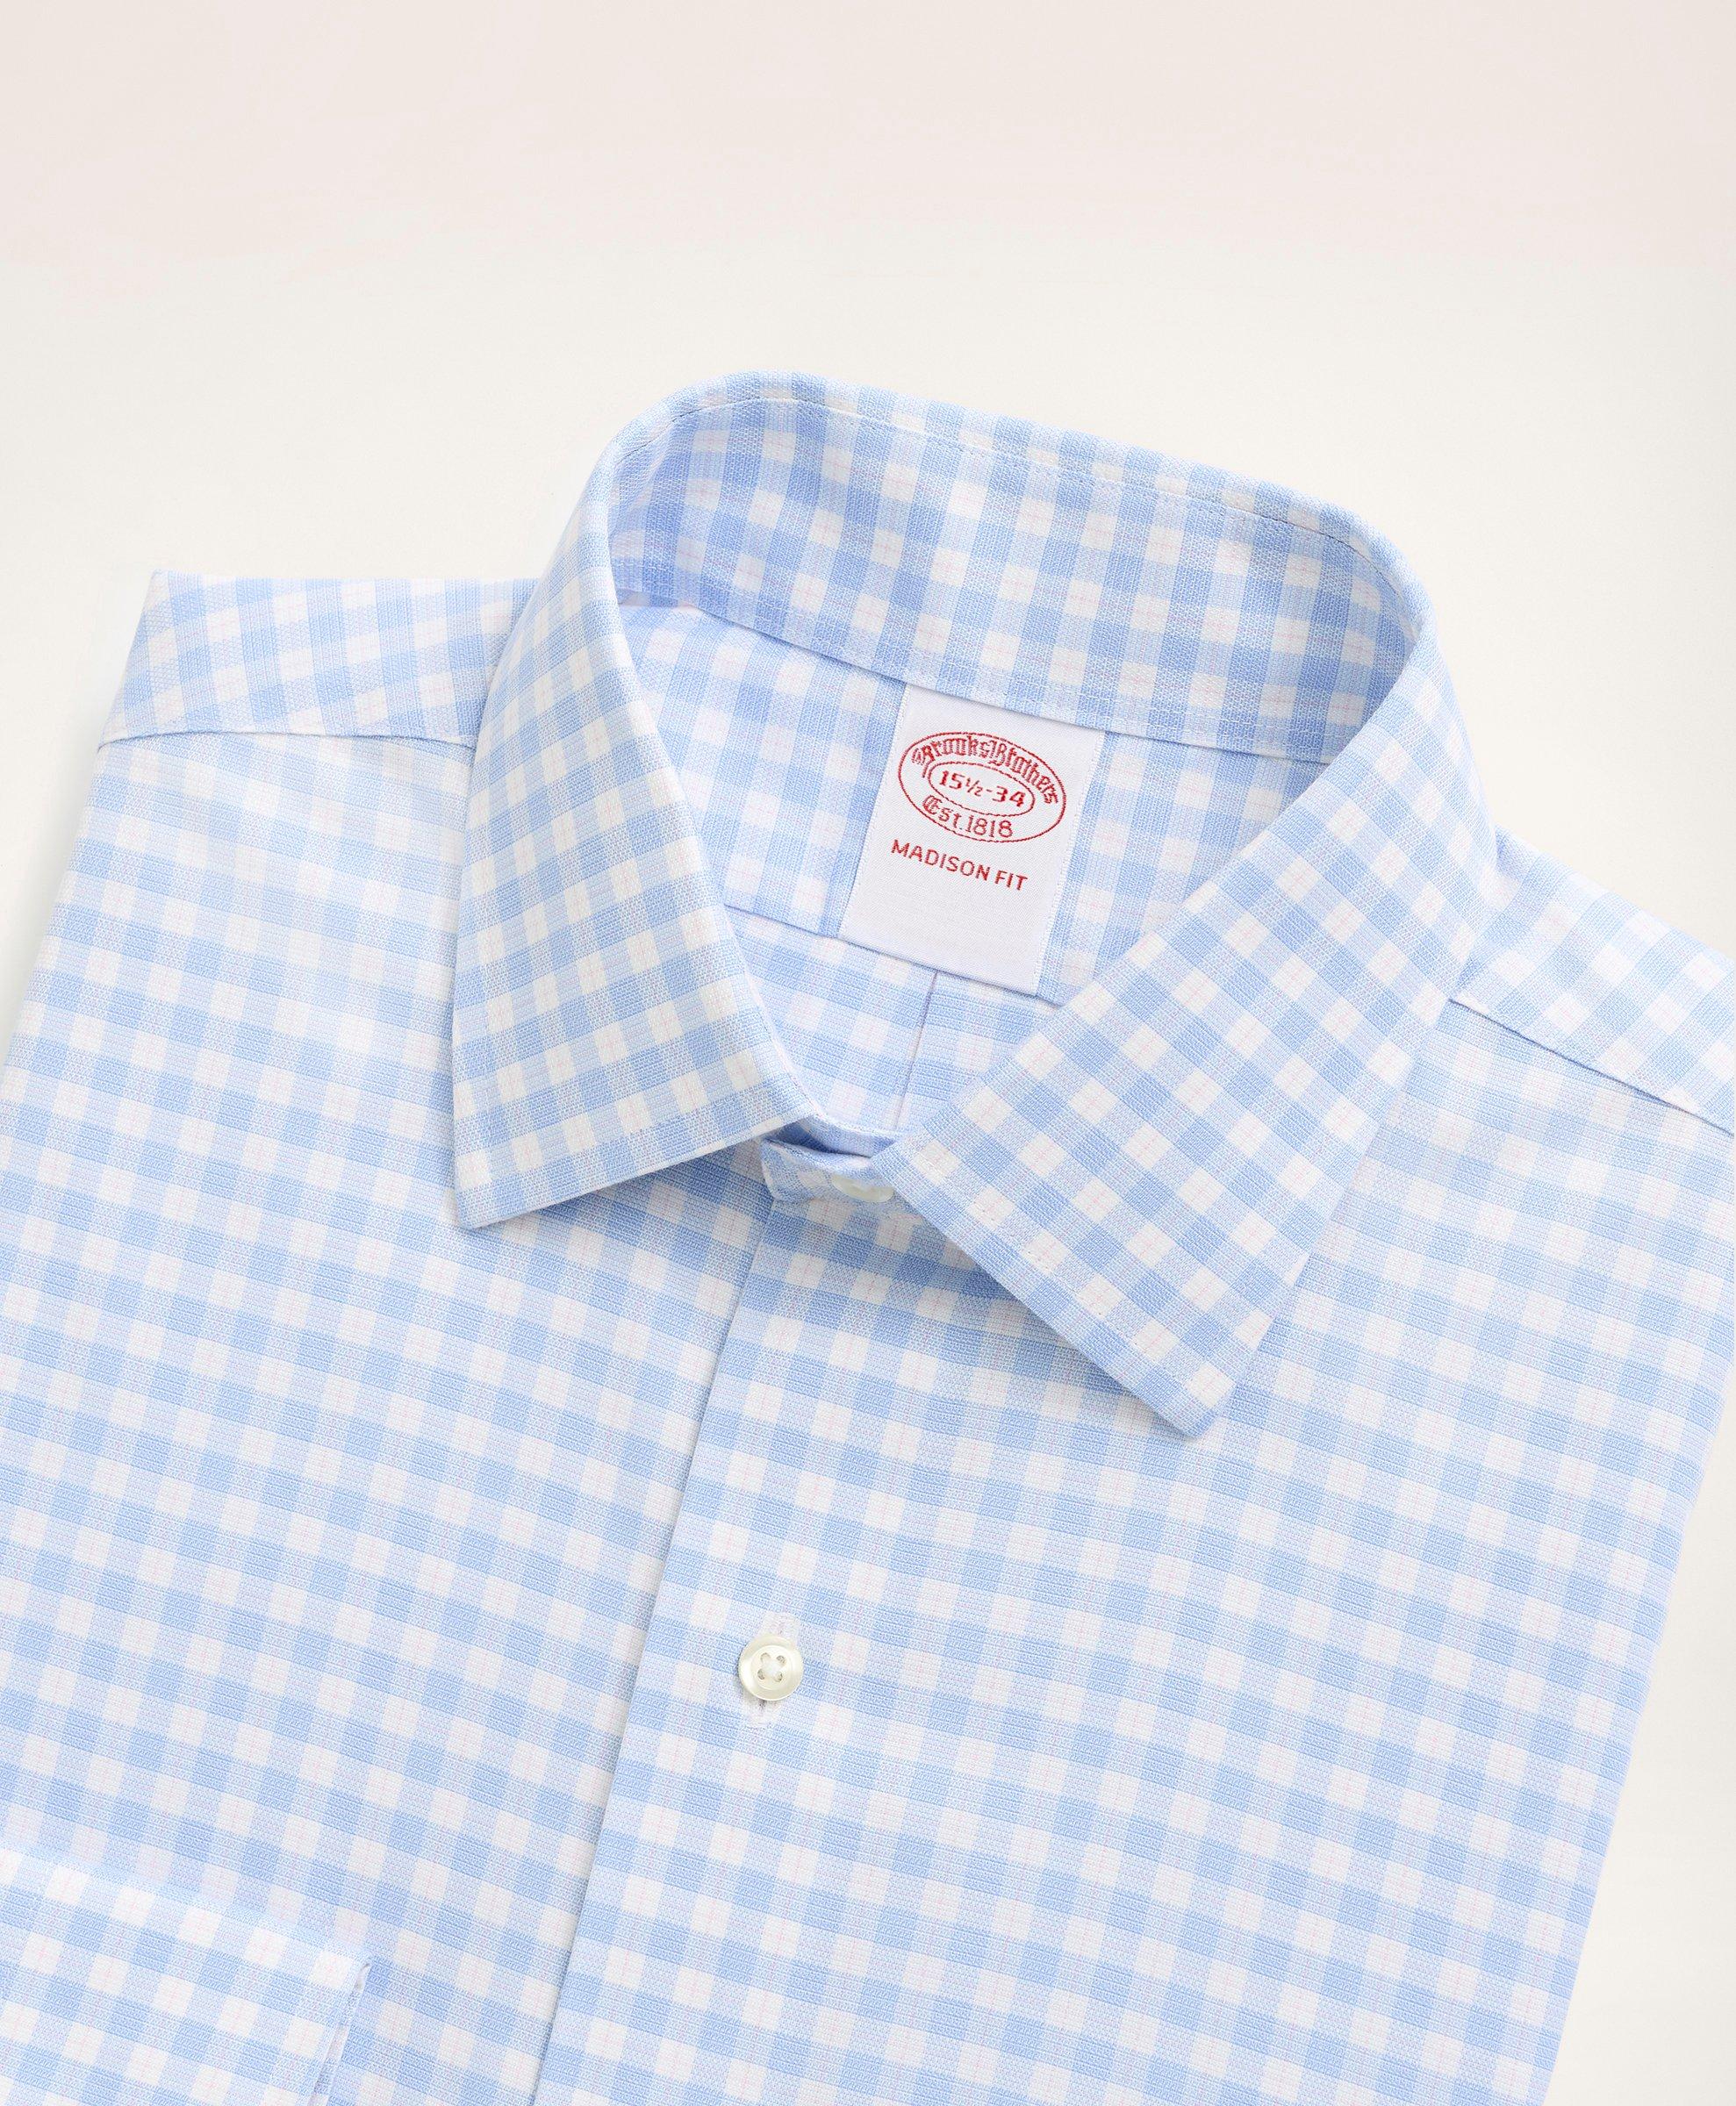 Stretch Madison Relaxed-Fit Dress Shirt, Non-Iron Royal Oxford Ainsley Collar Check, image 2